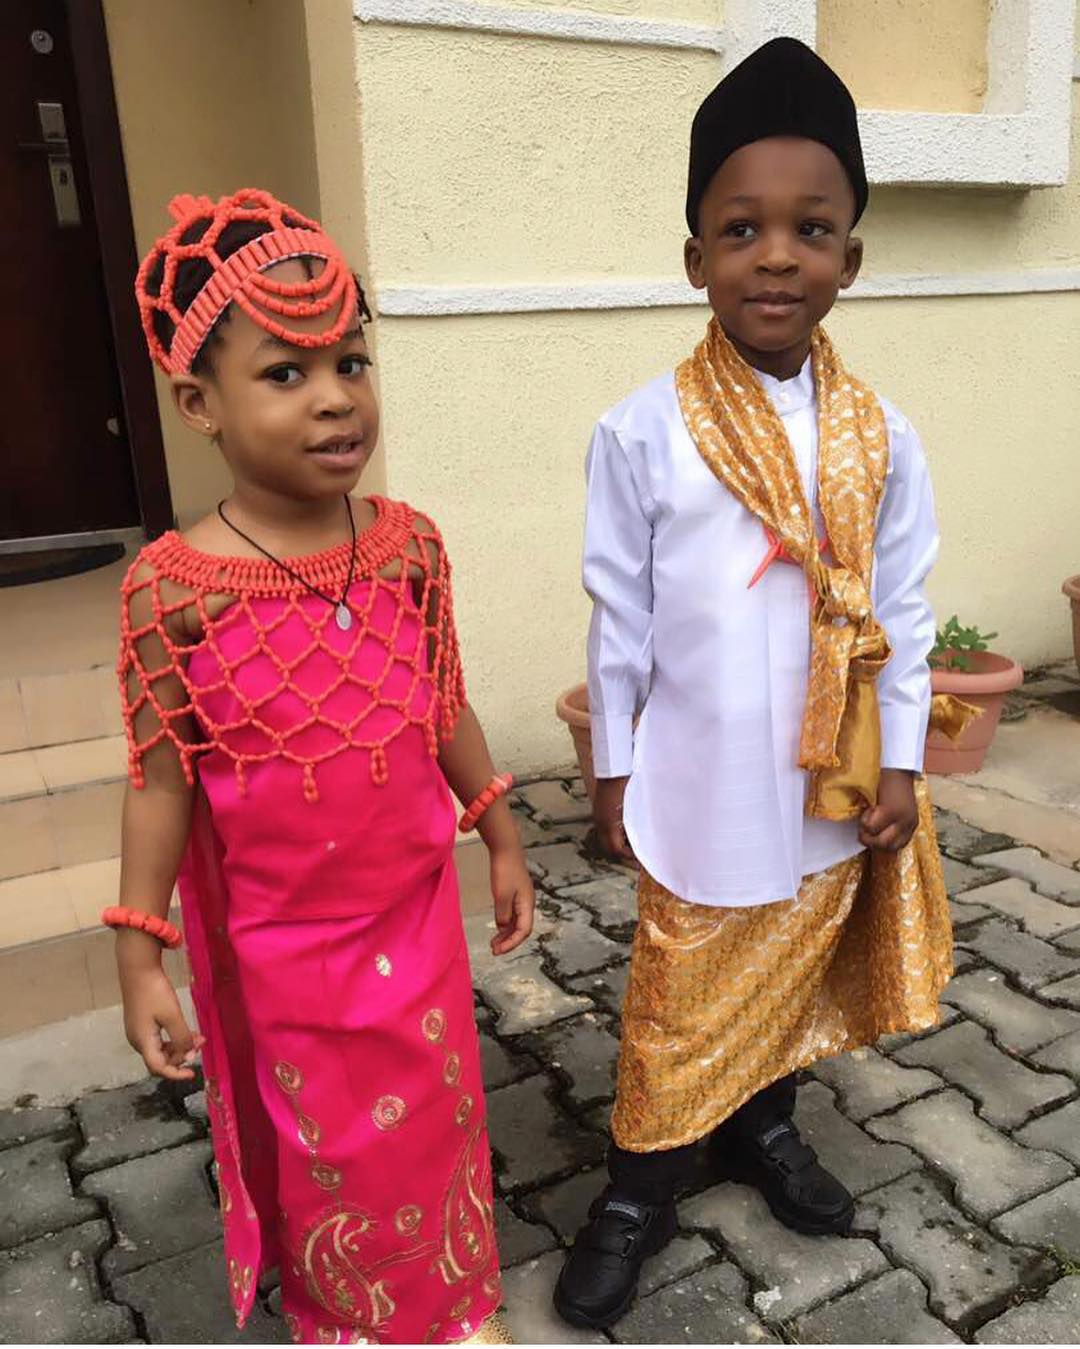 For The Culture: More Kids Fashion For Cultural Day